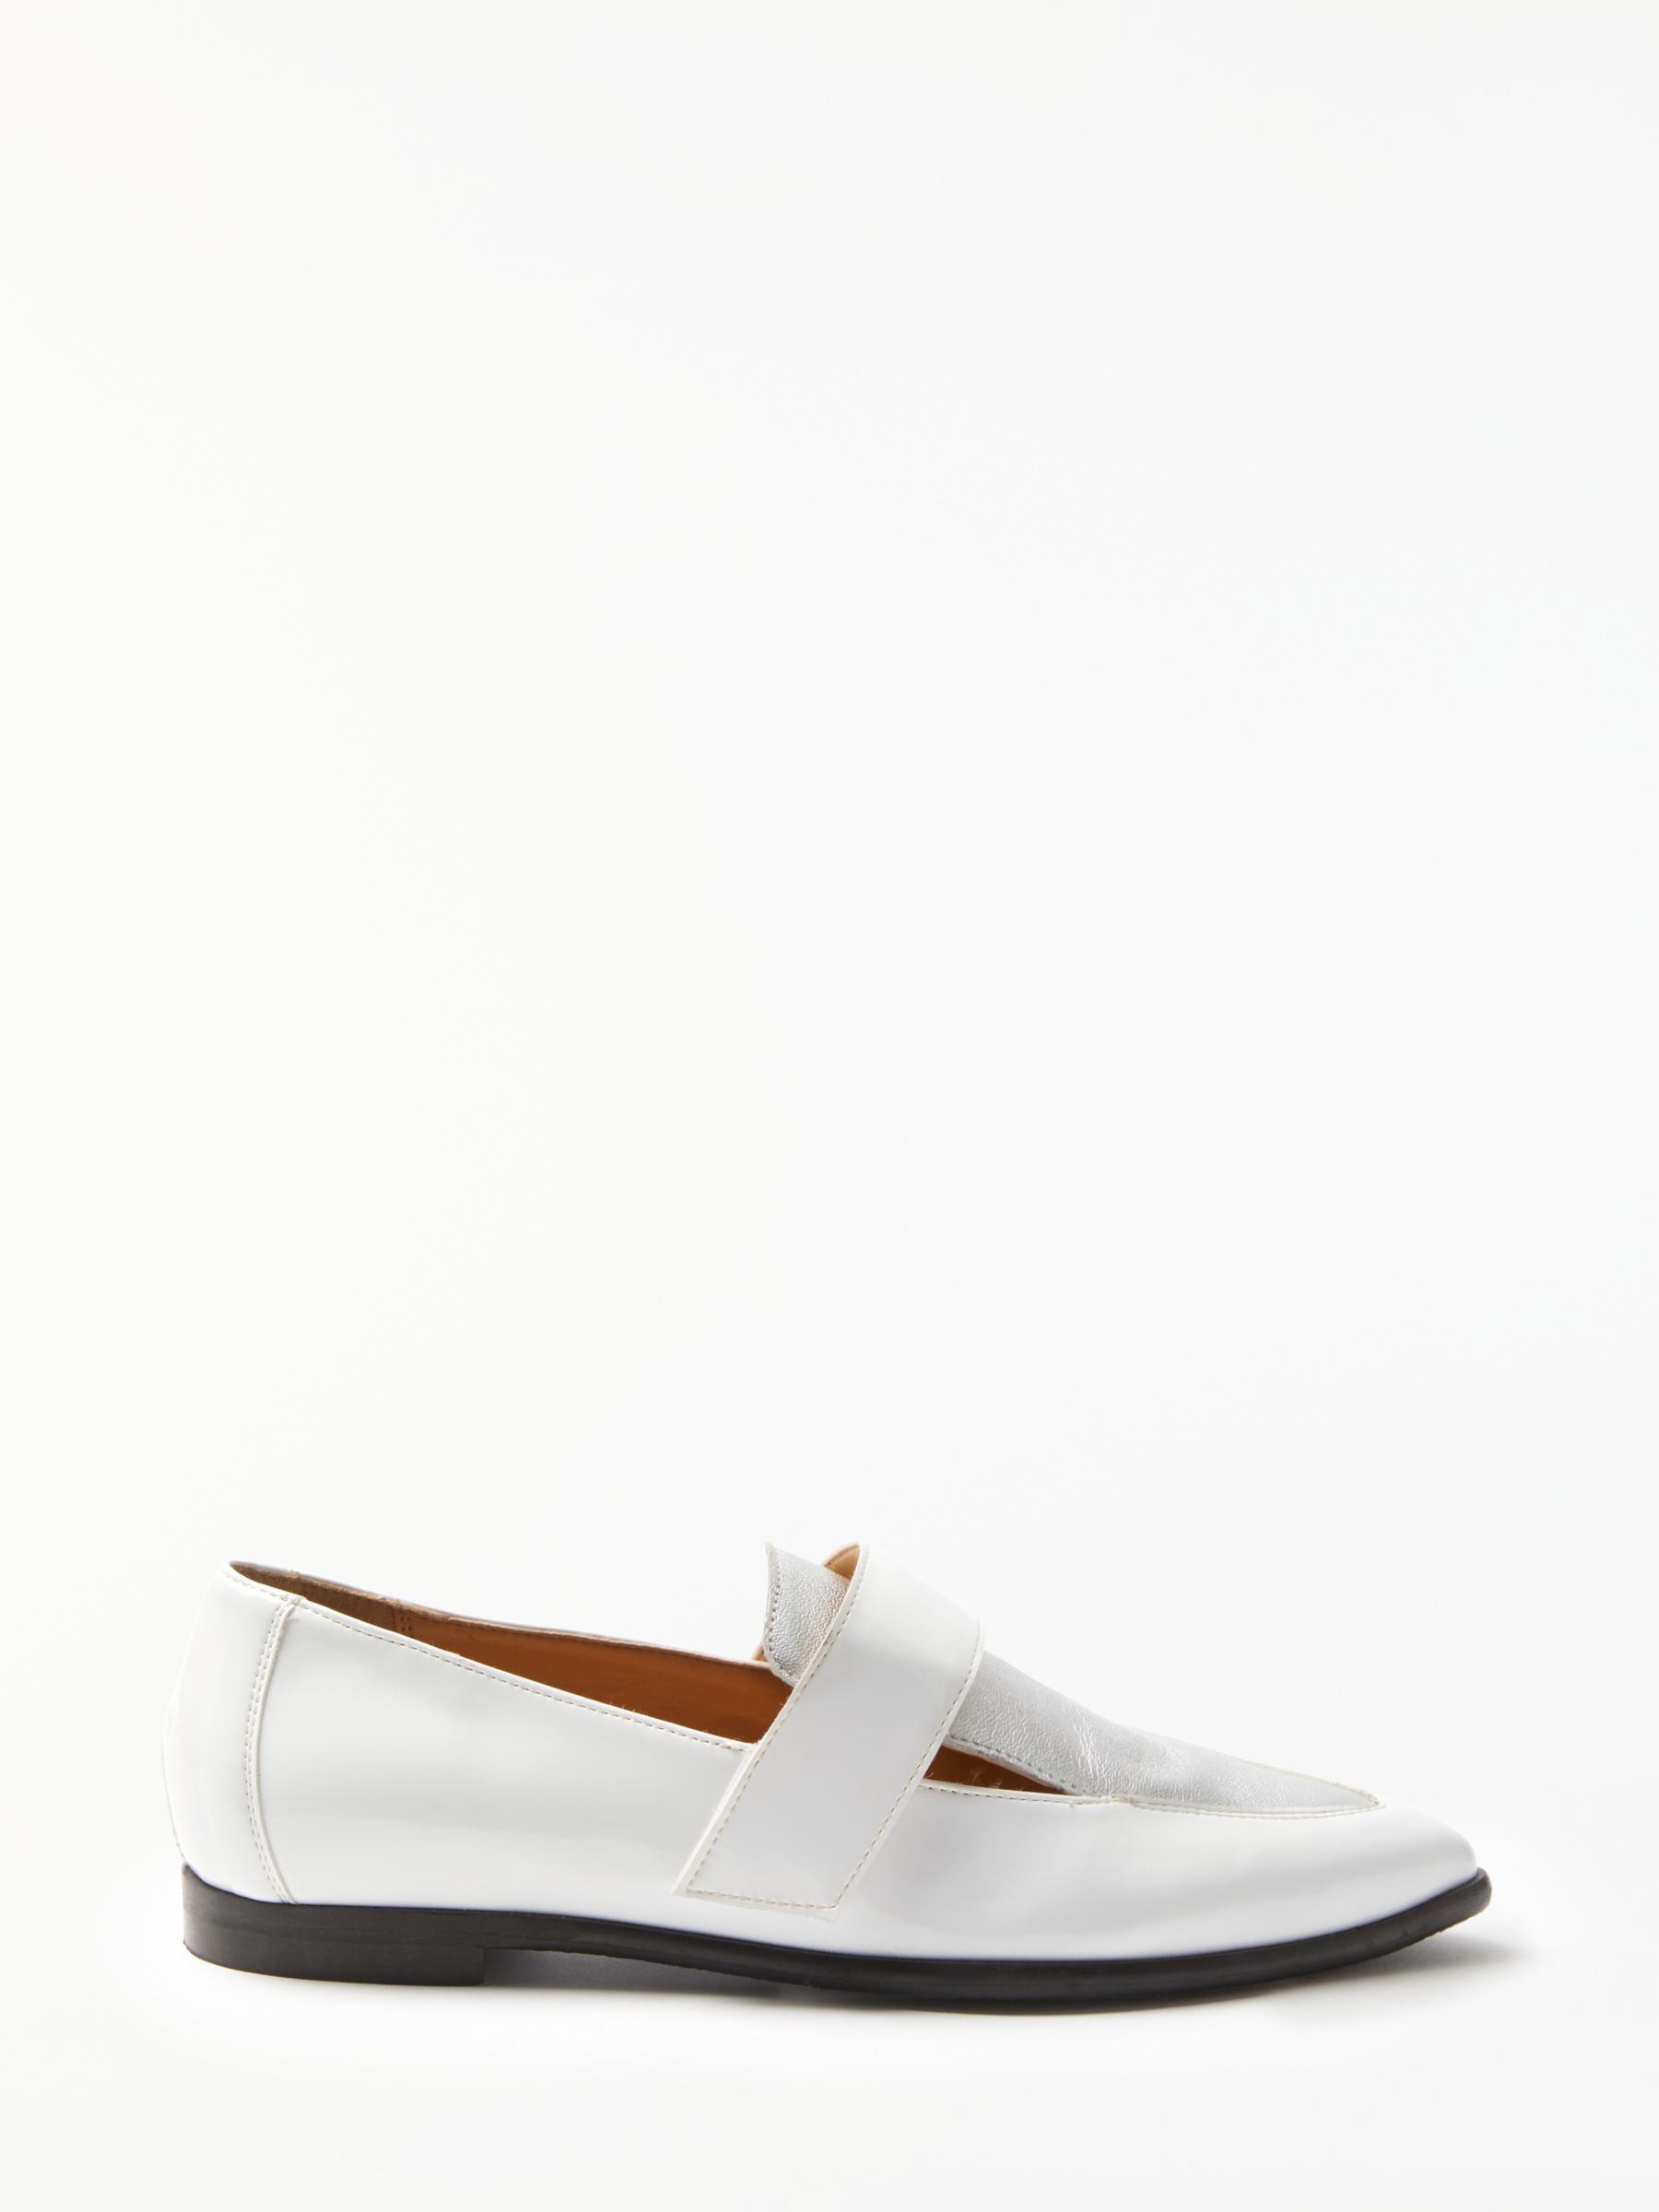 Kin Geirrid Loafers, Off White Leather/Suede, 4